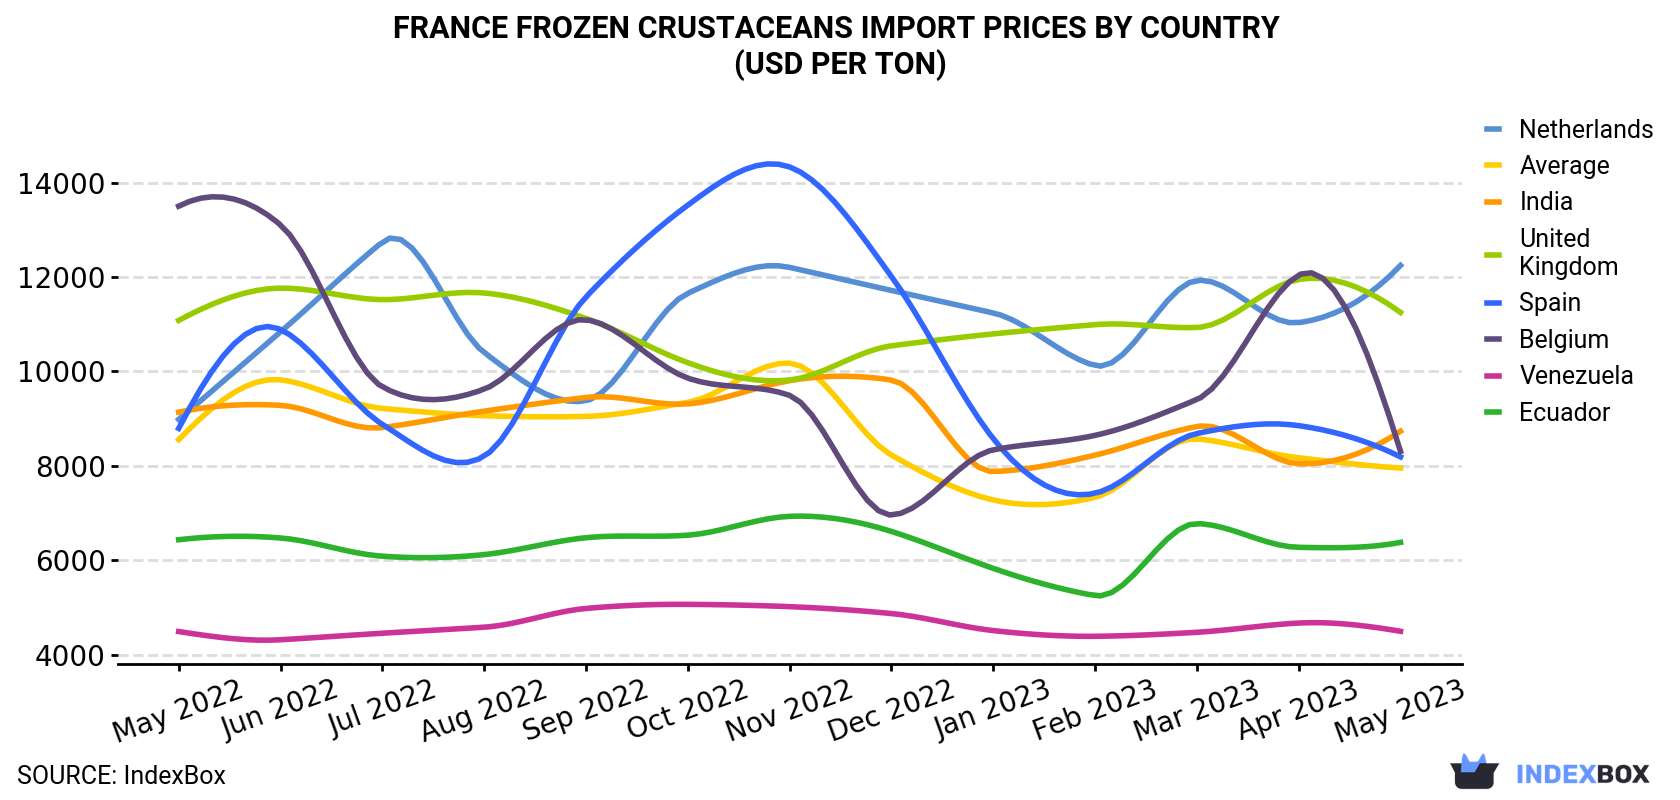 France Frozen Crustaceans Import Prices By Country (USD Per Ton)